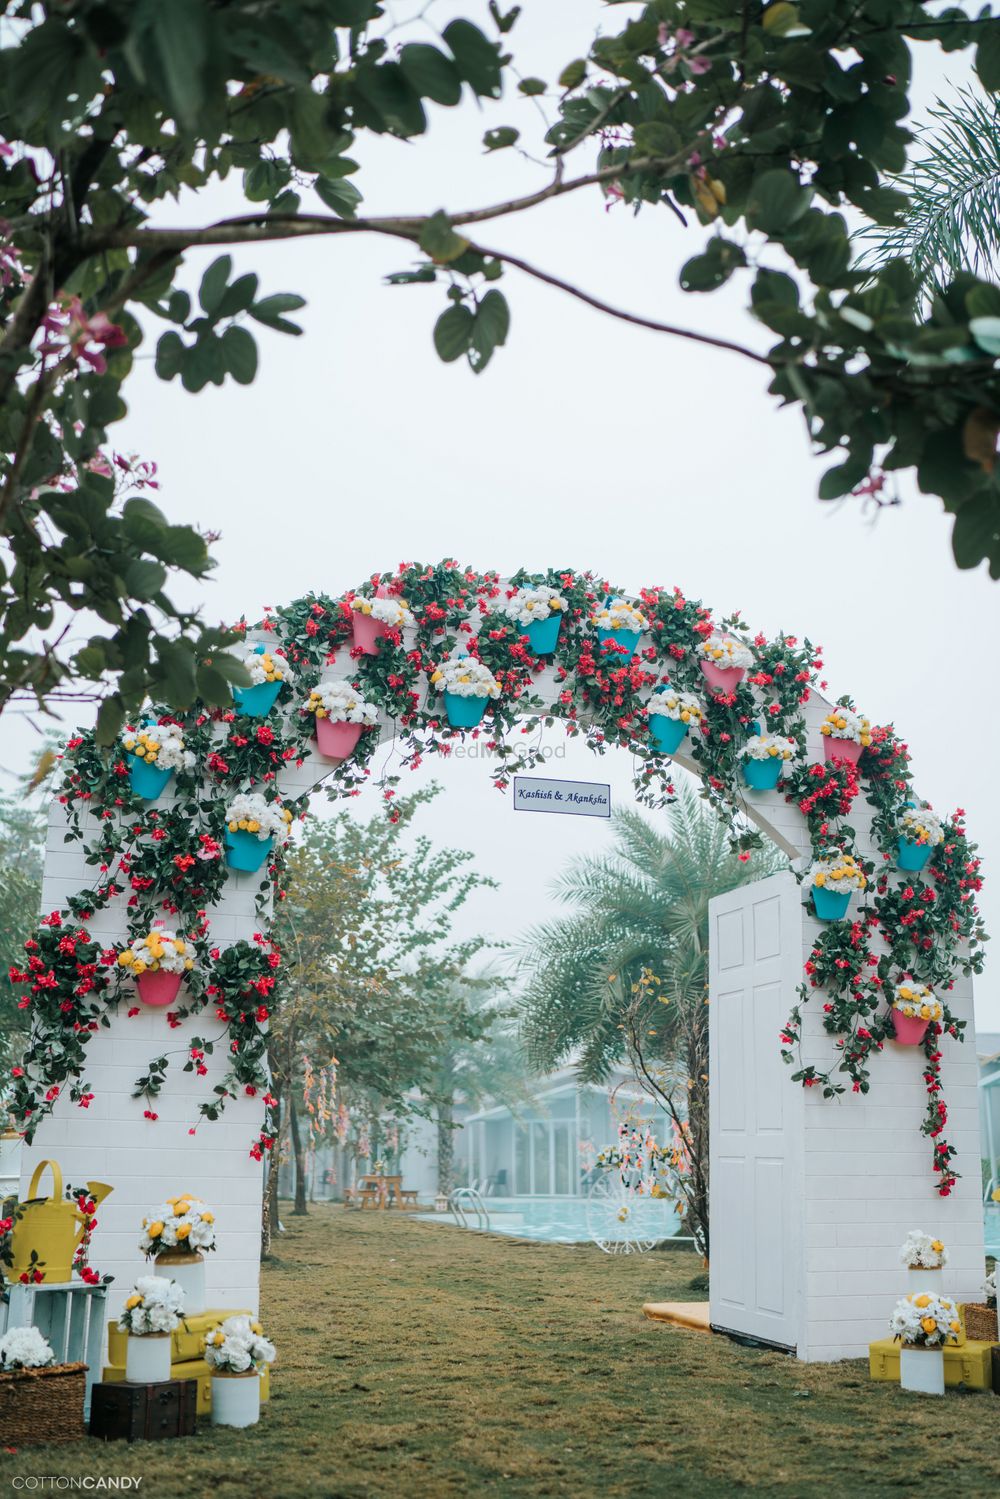 Photo of Archway entrance decorated with floral vases.